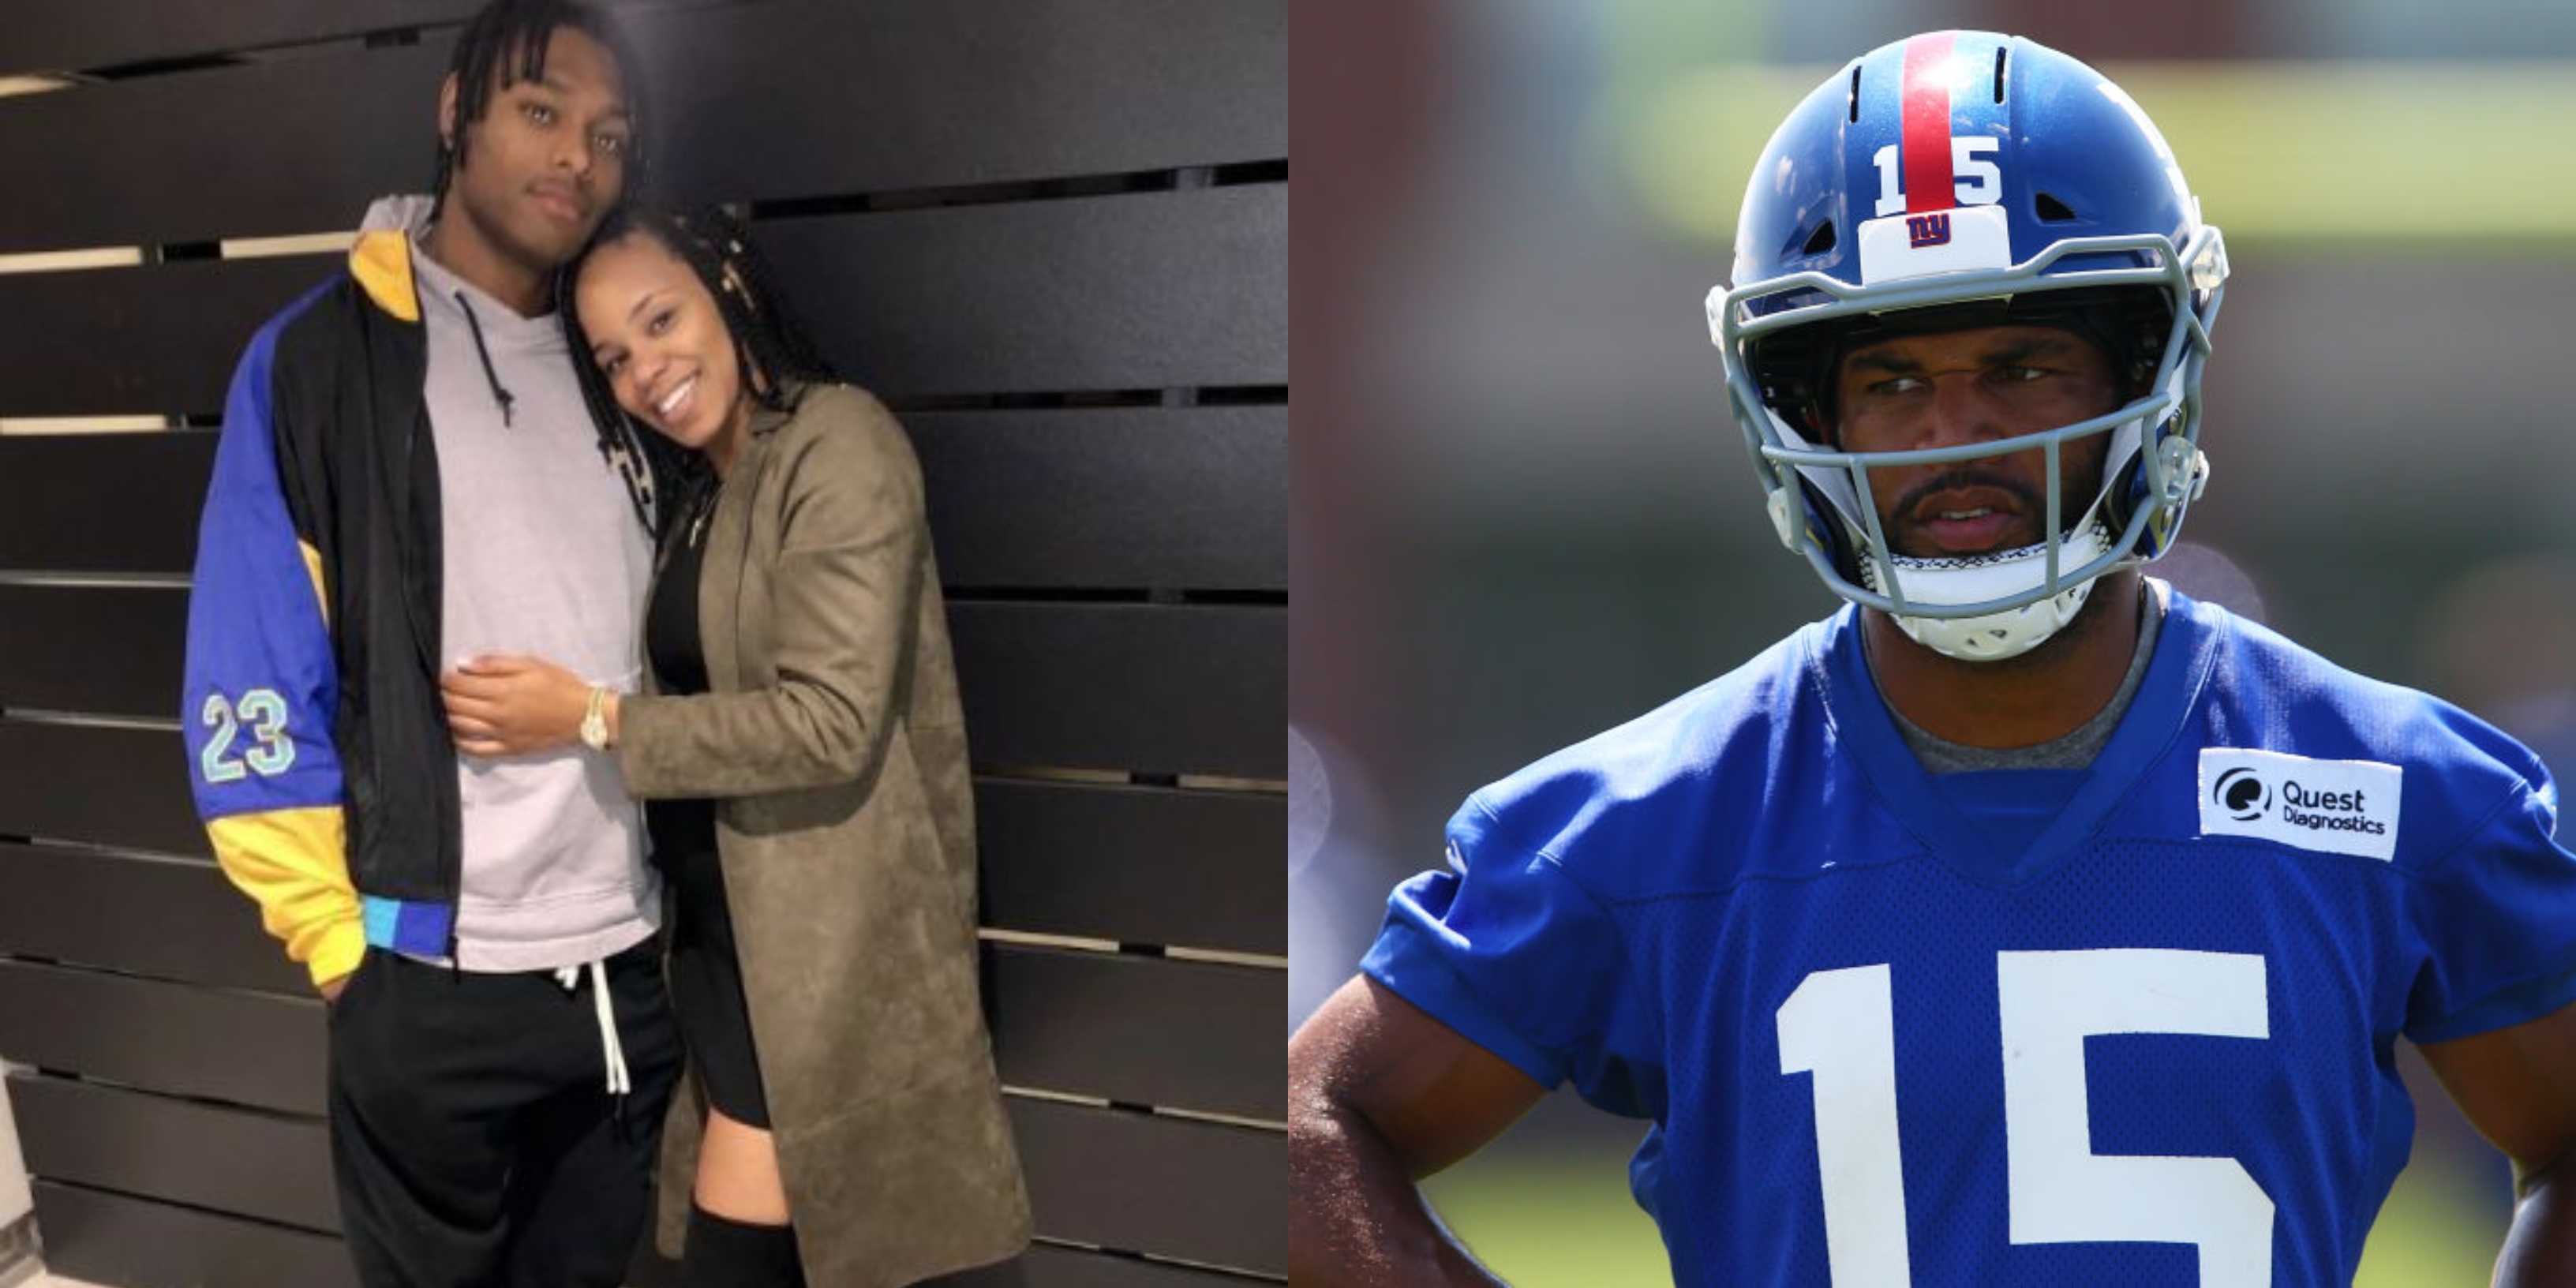 Golden Tate Gets Into It With Jalen Ramsey Who Disrespected His Sister By Leaving Her While